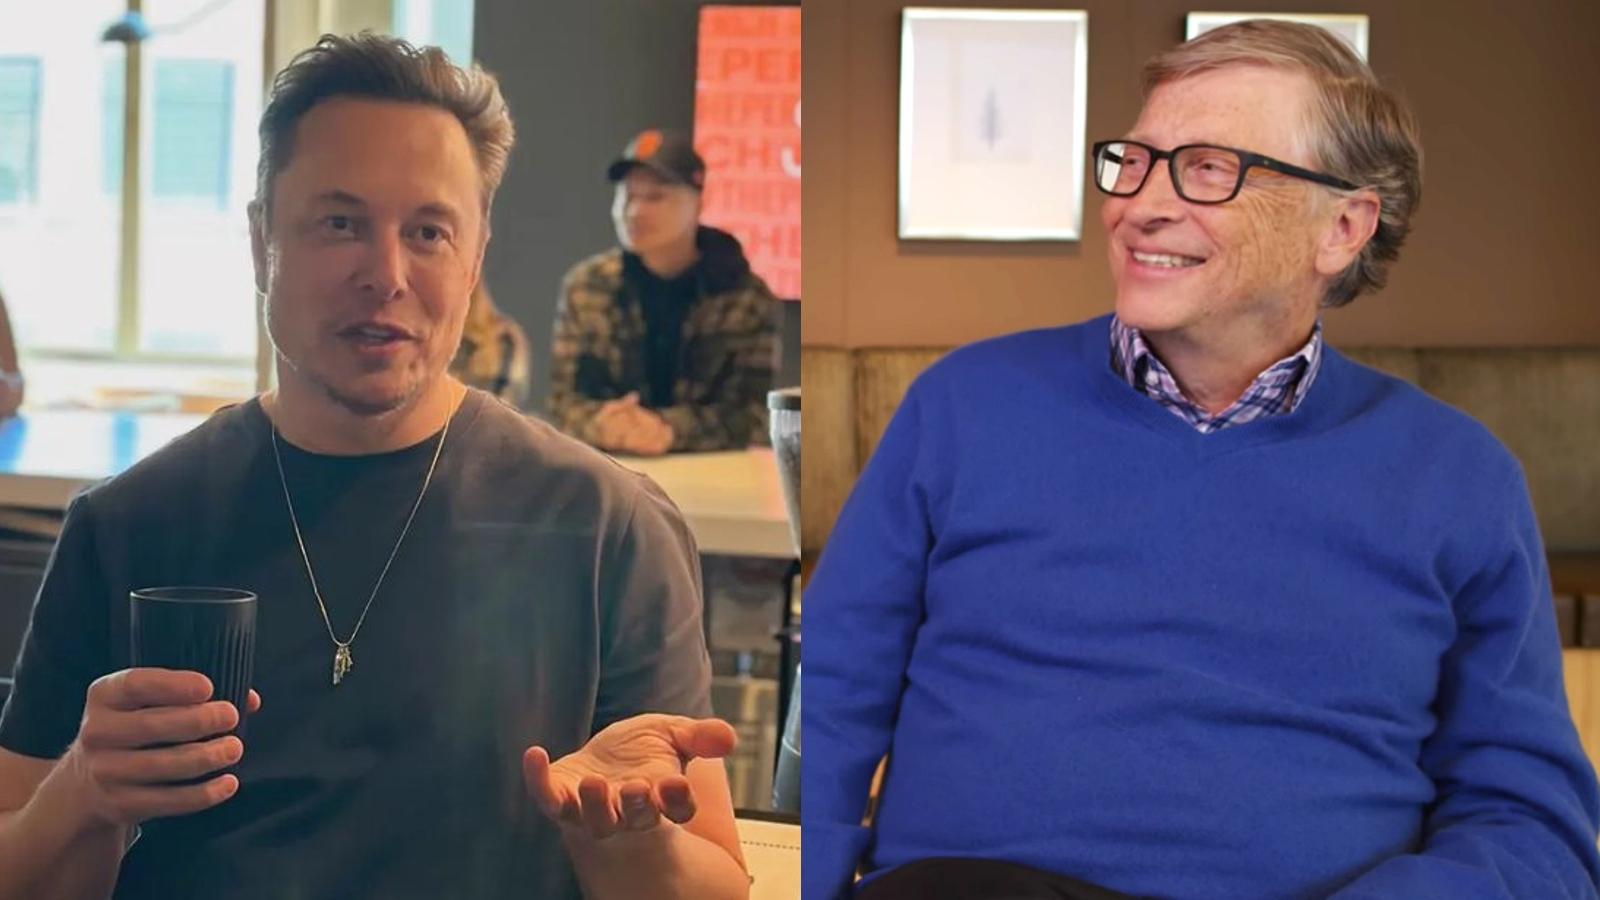 Elon Musk and Bill Gates side-by-side image